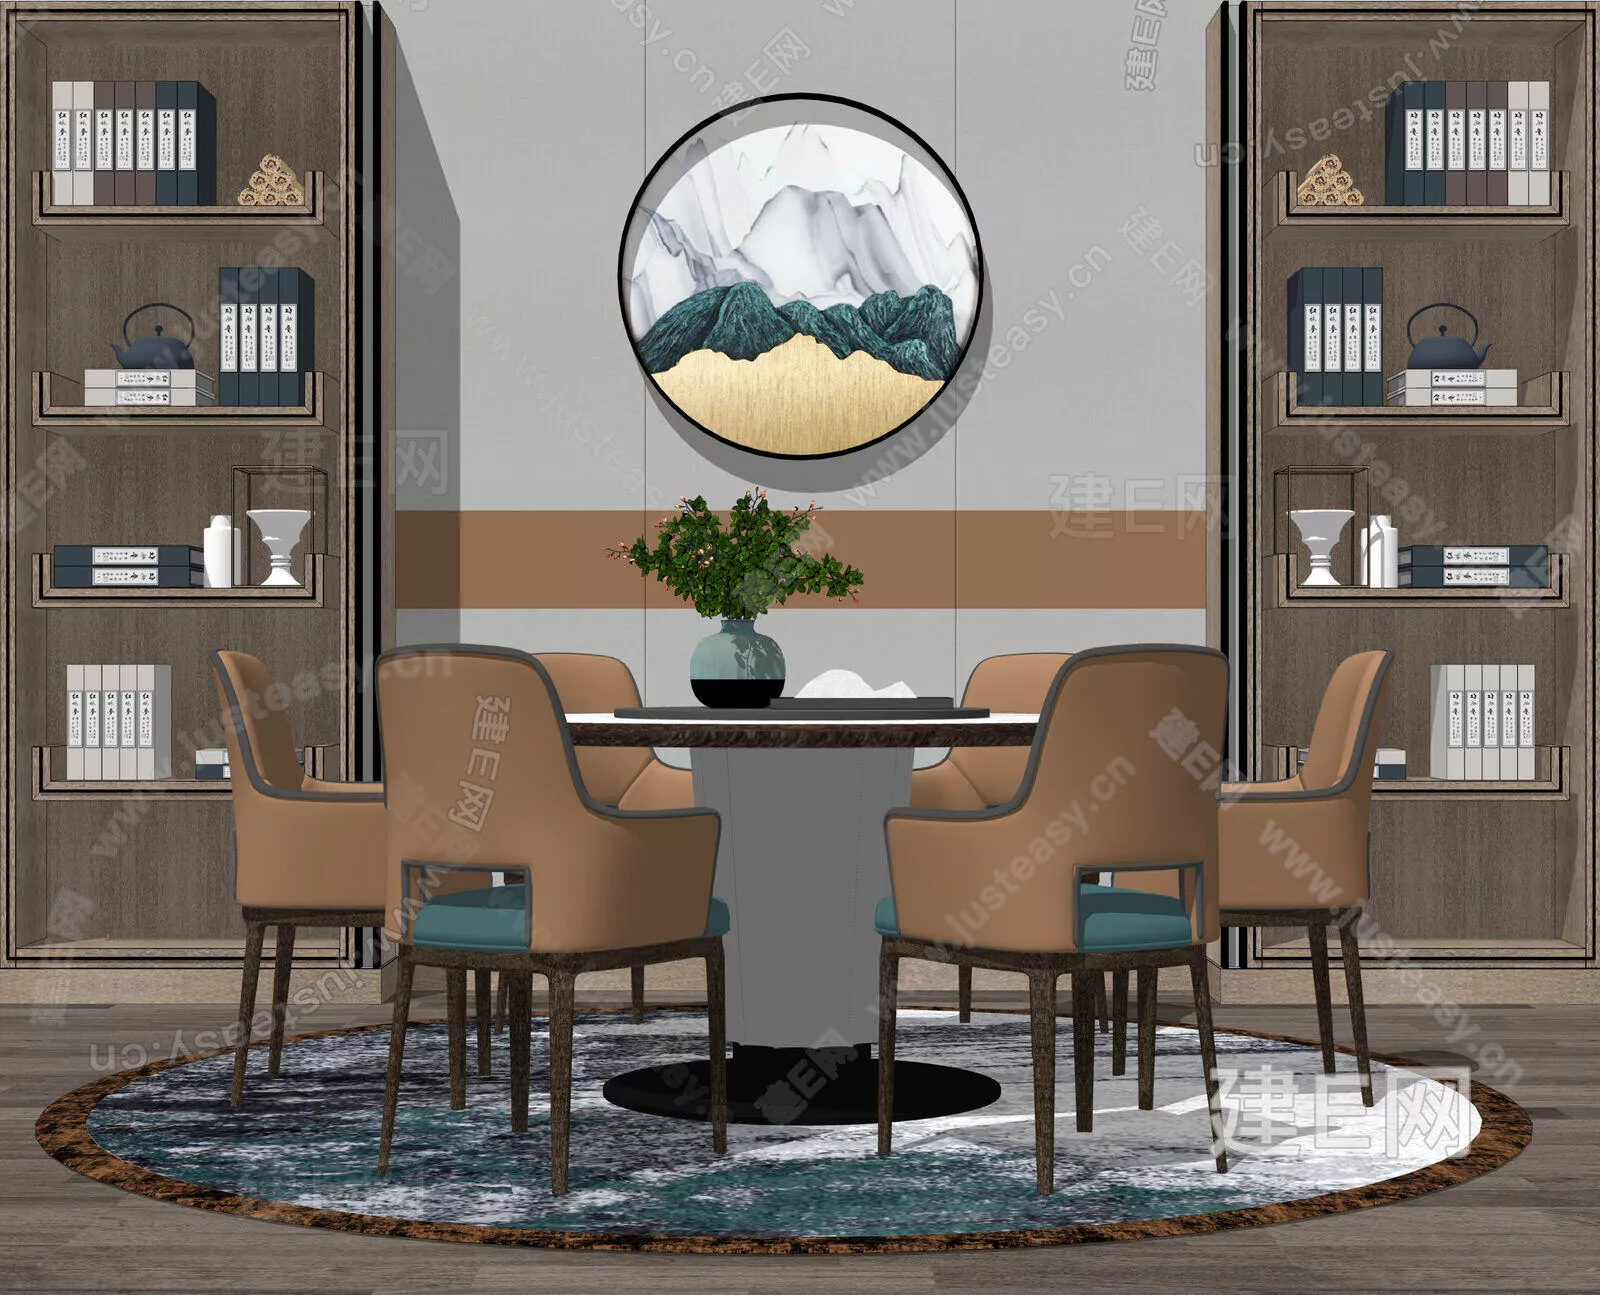 CHINESE DINING TABLE SET - SKETCHUP 3D MODEL - ENSCAPE - 111755644